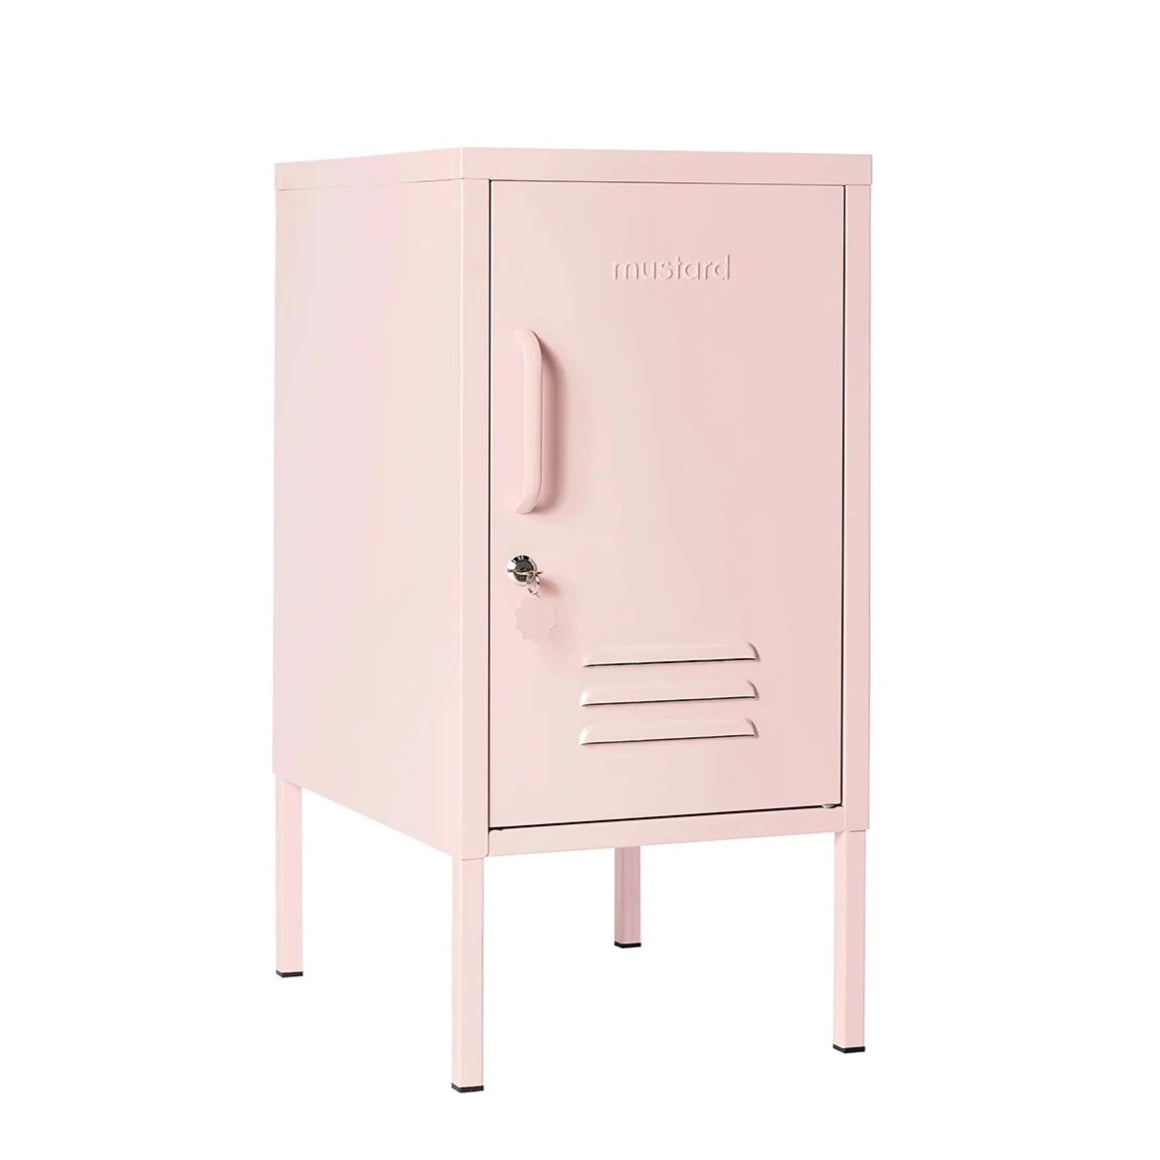 The Shorty Locker in Blush By Mustard Made